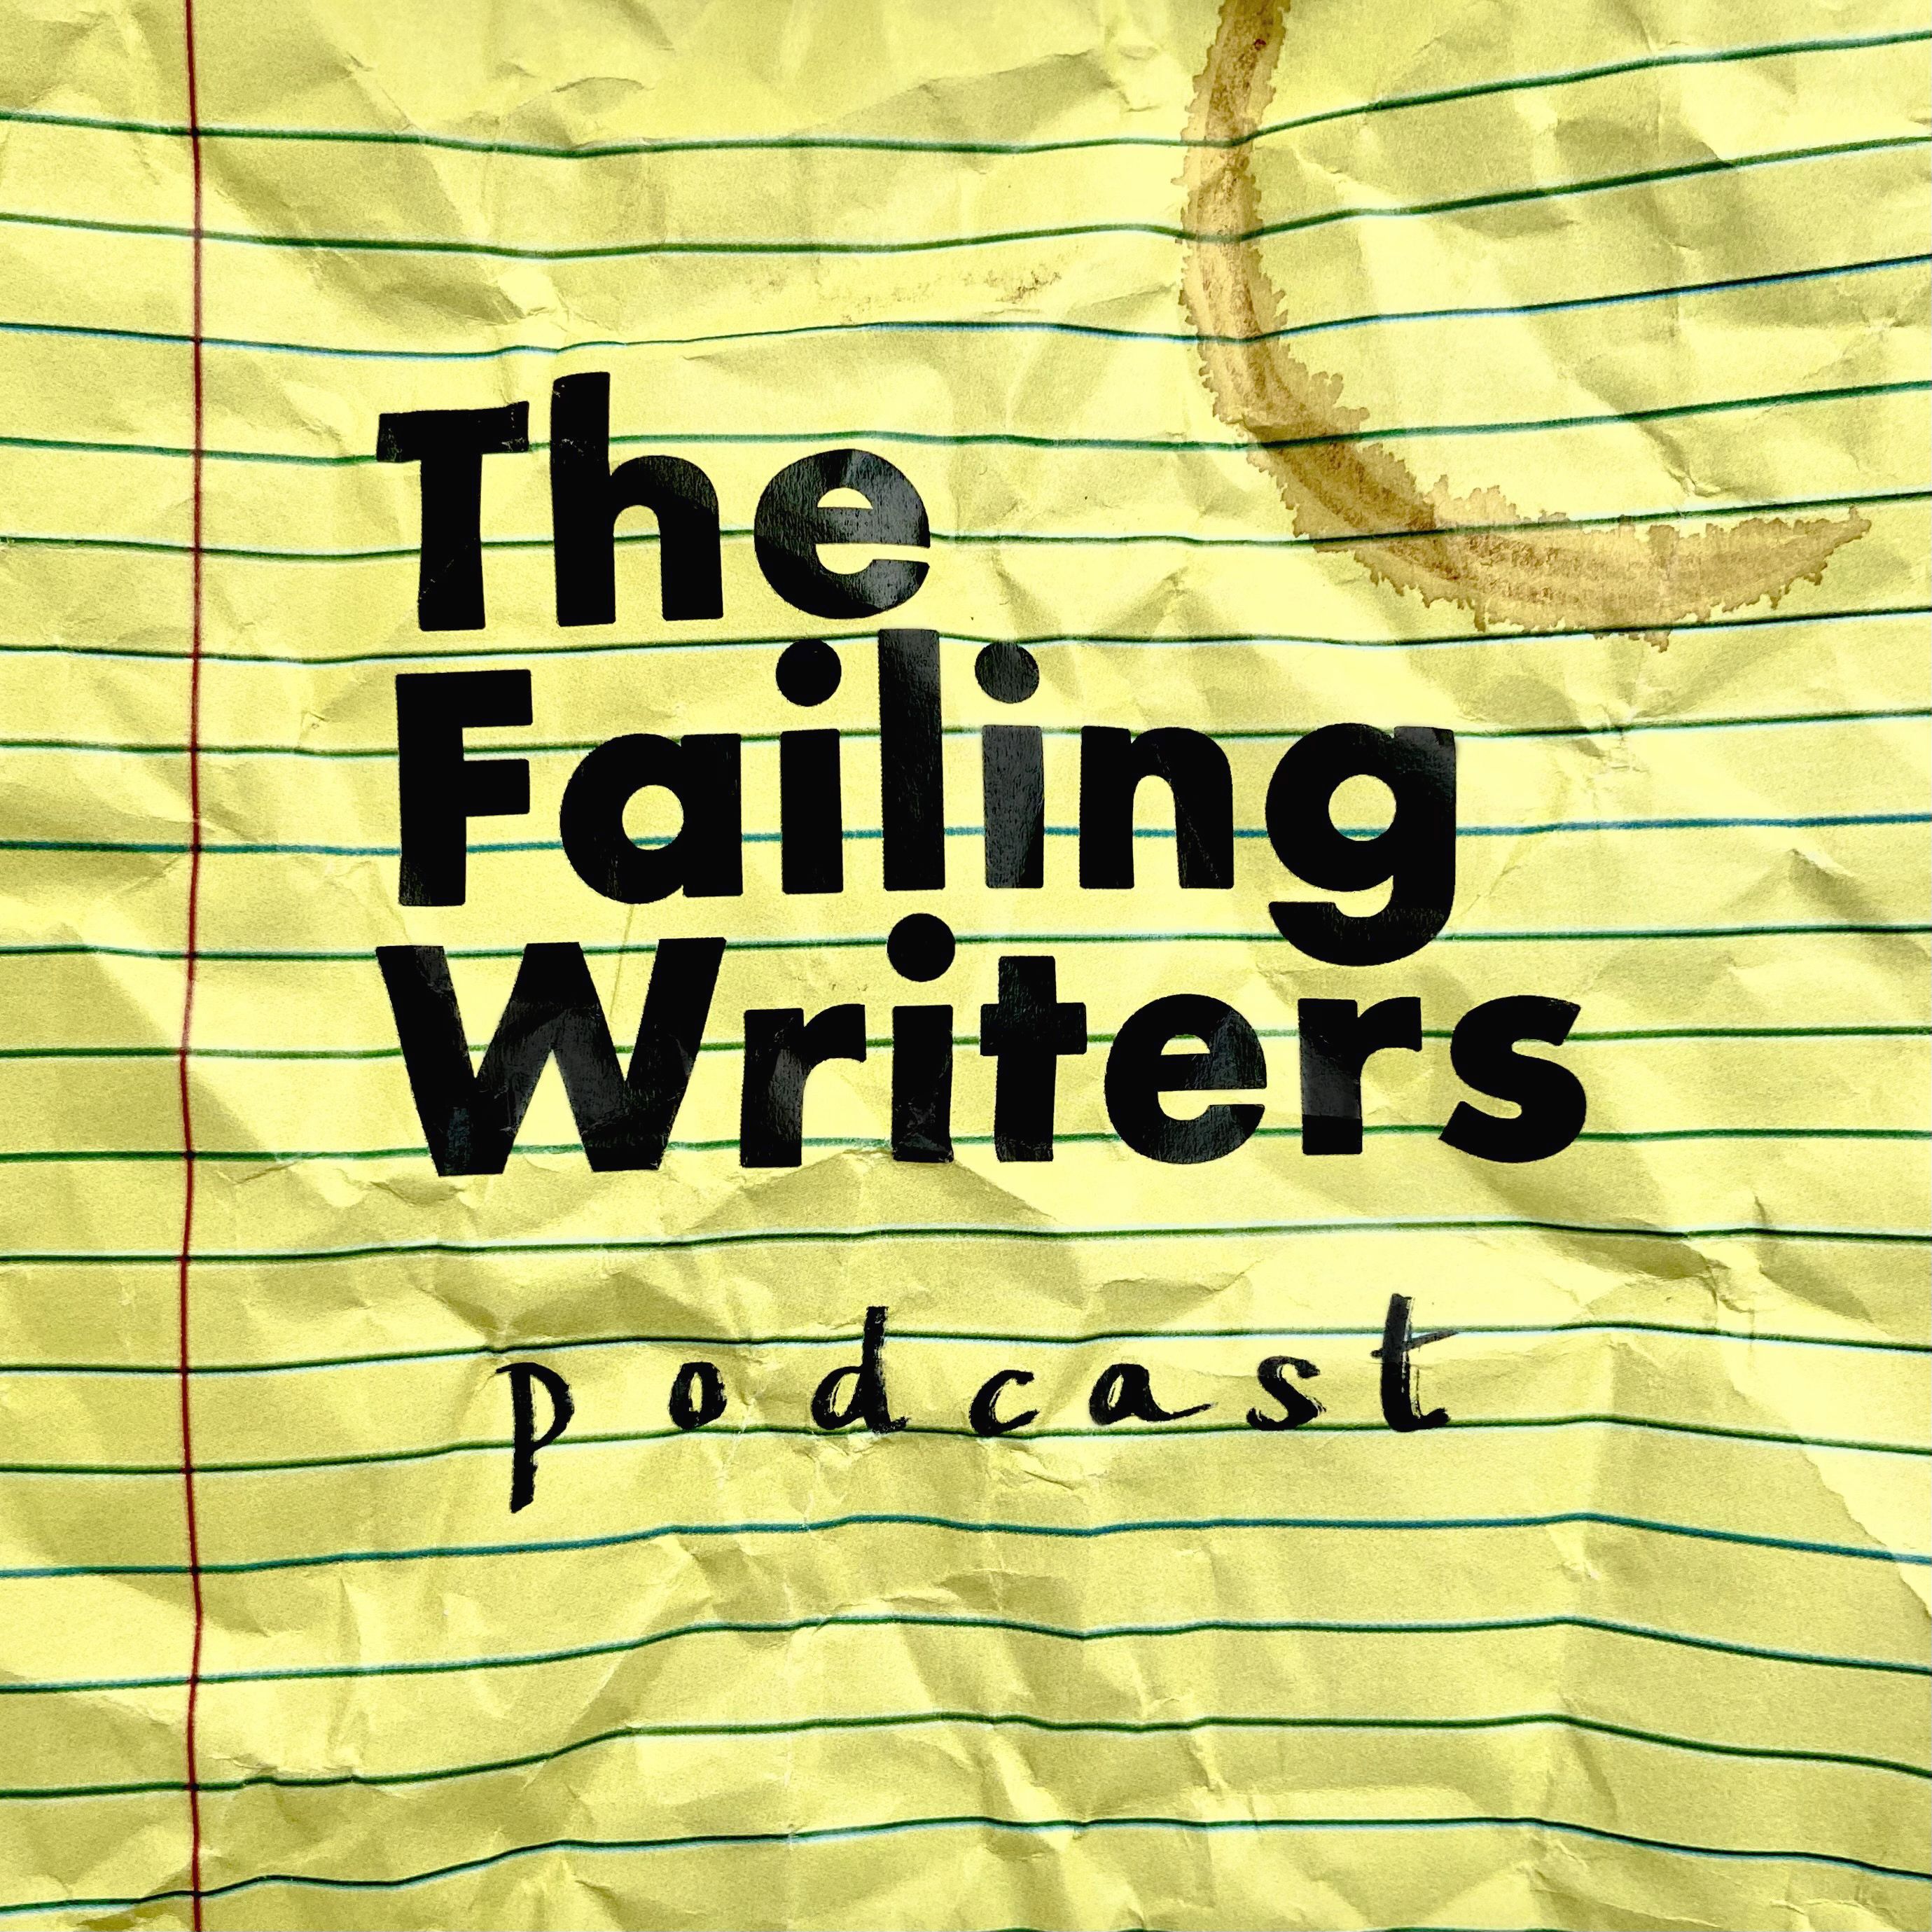 The Failing Writers Podcast podcast show image